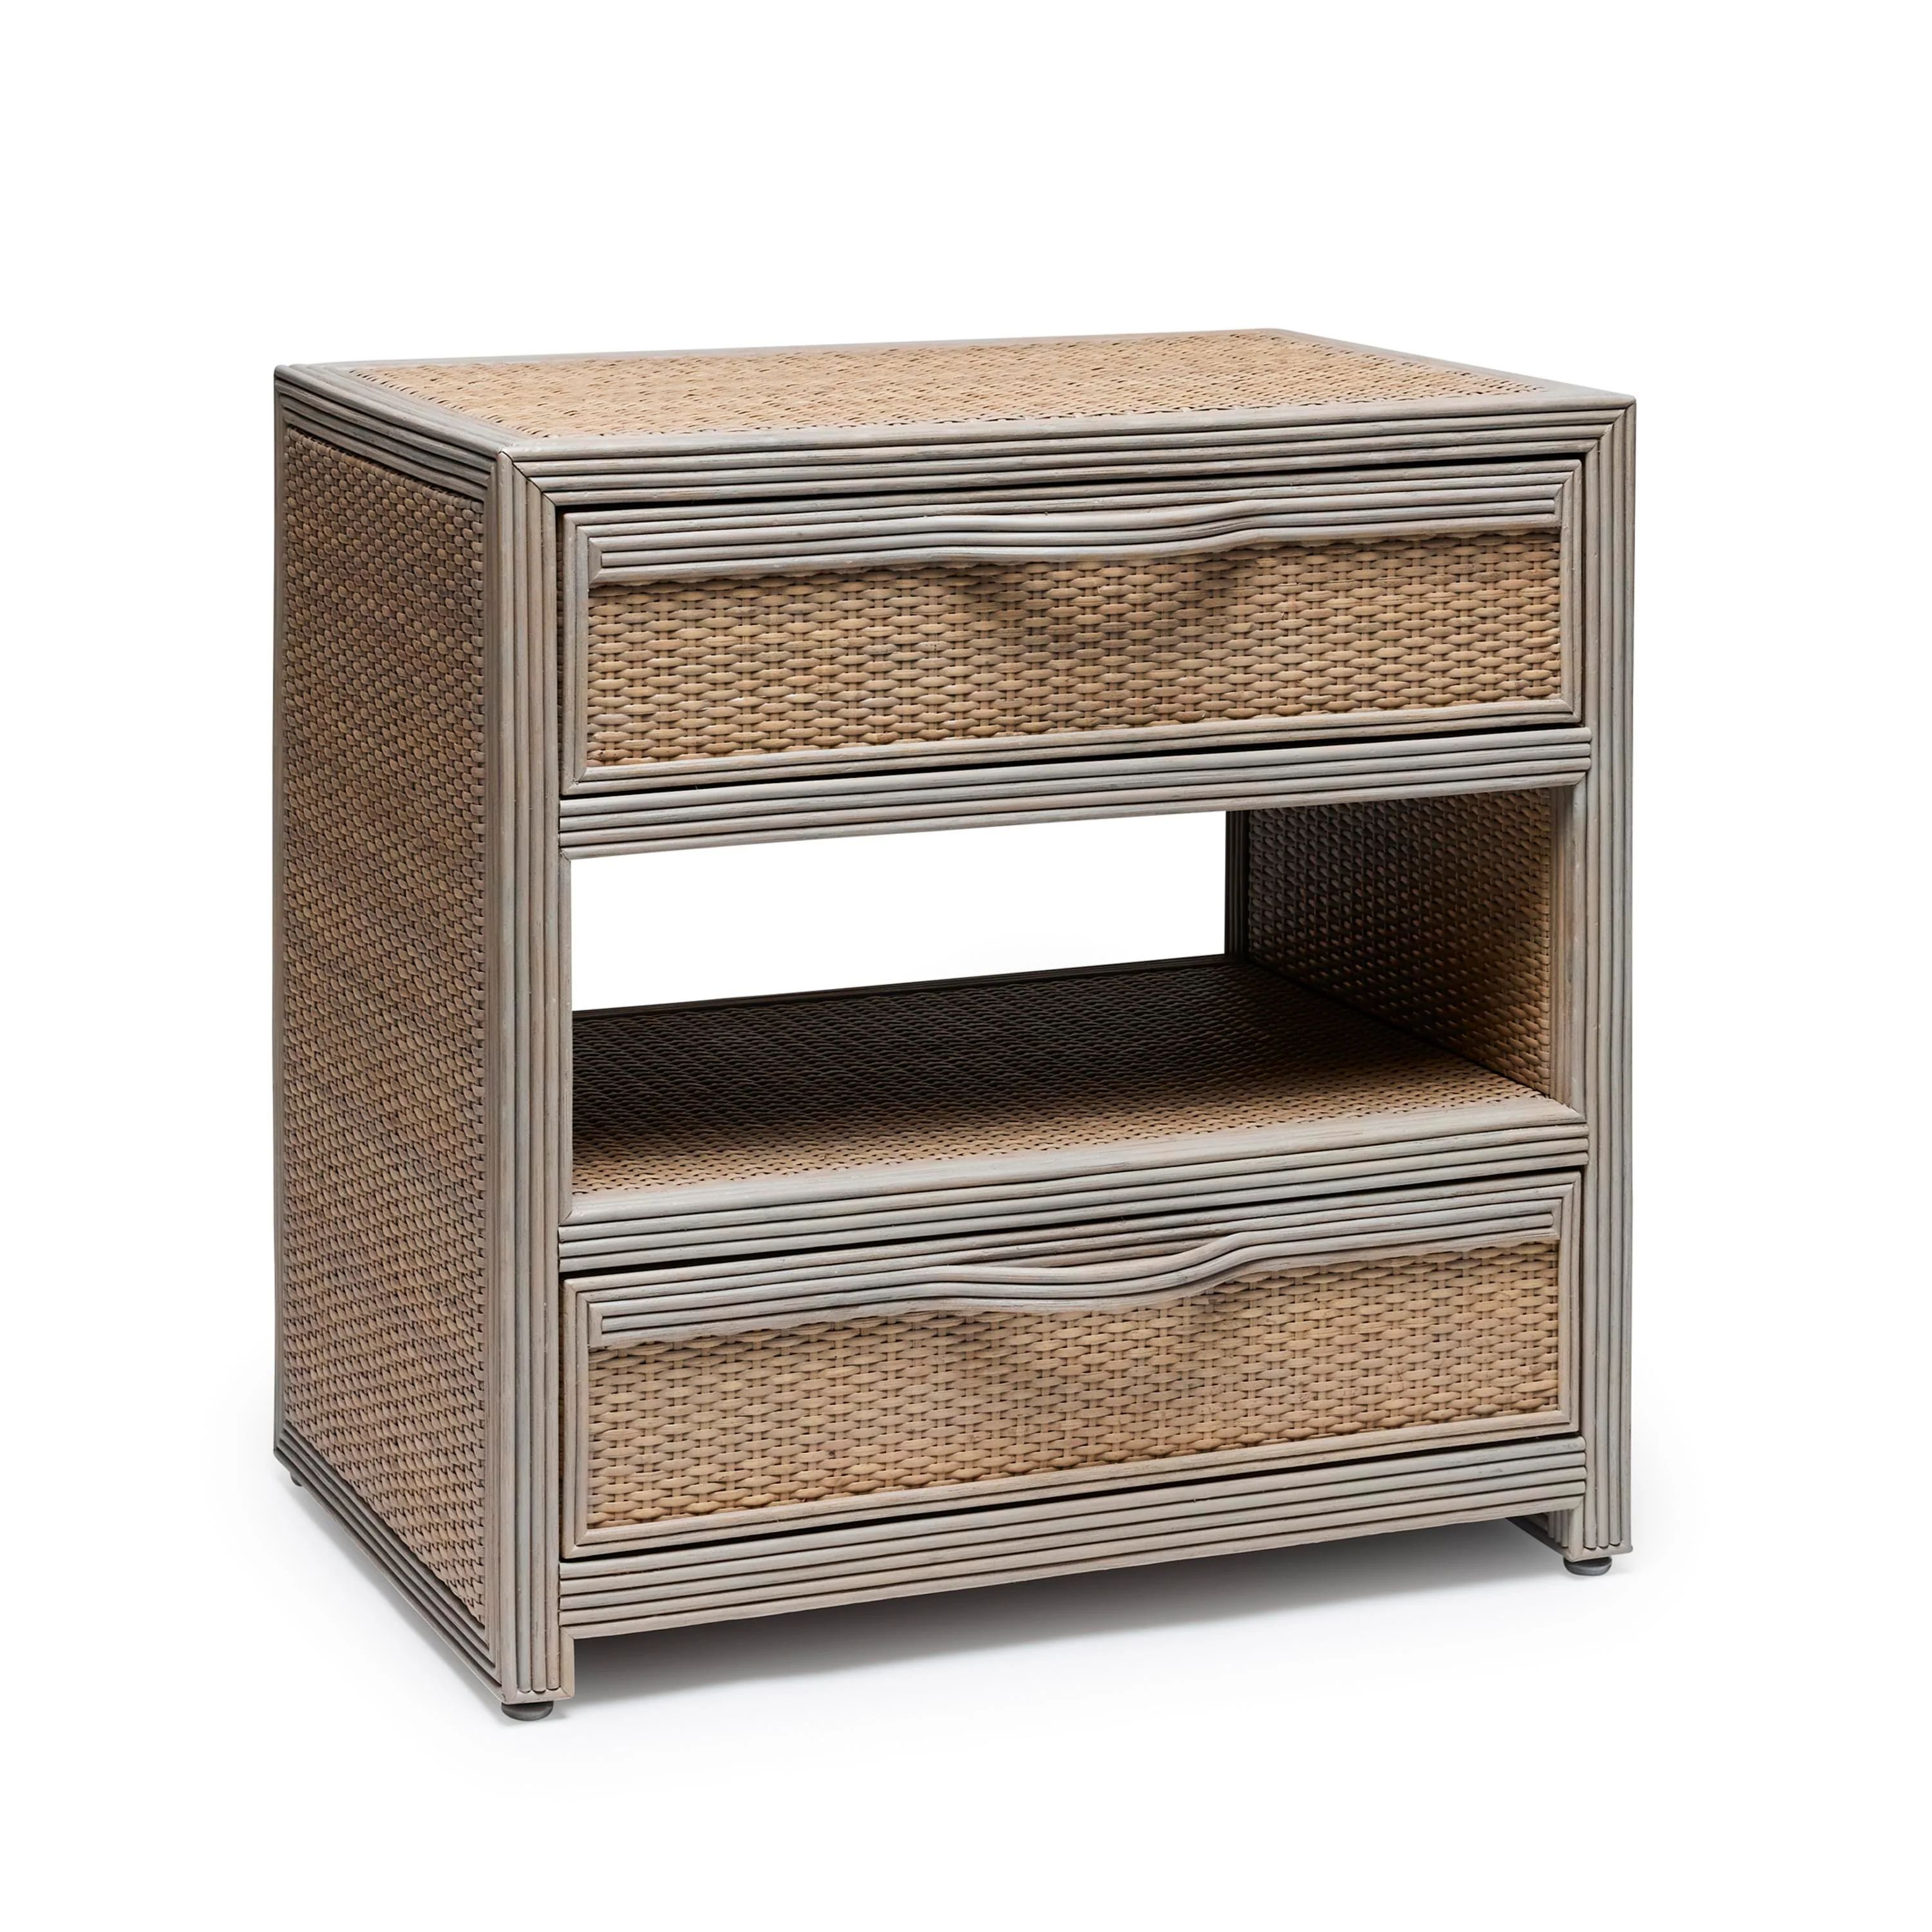 Melbourne Bedside Chest - Grey Wash | Alchemy Fine Home